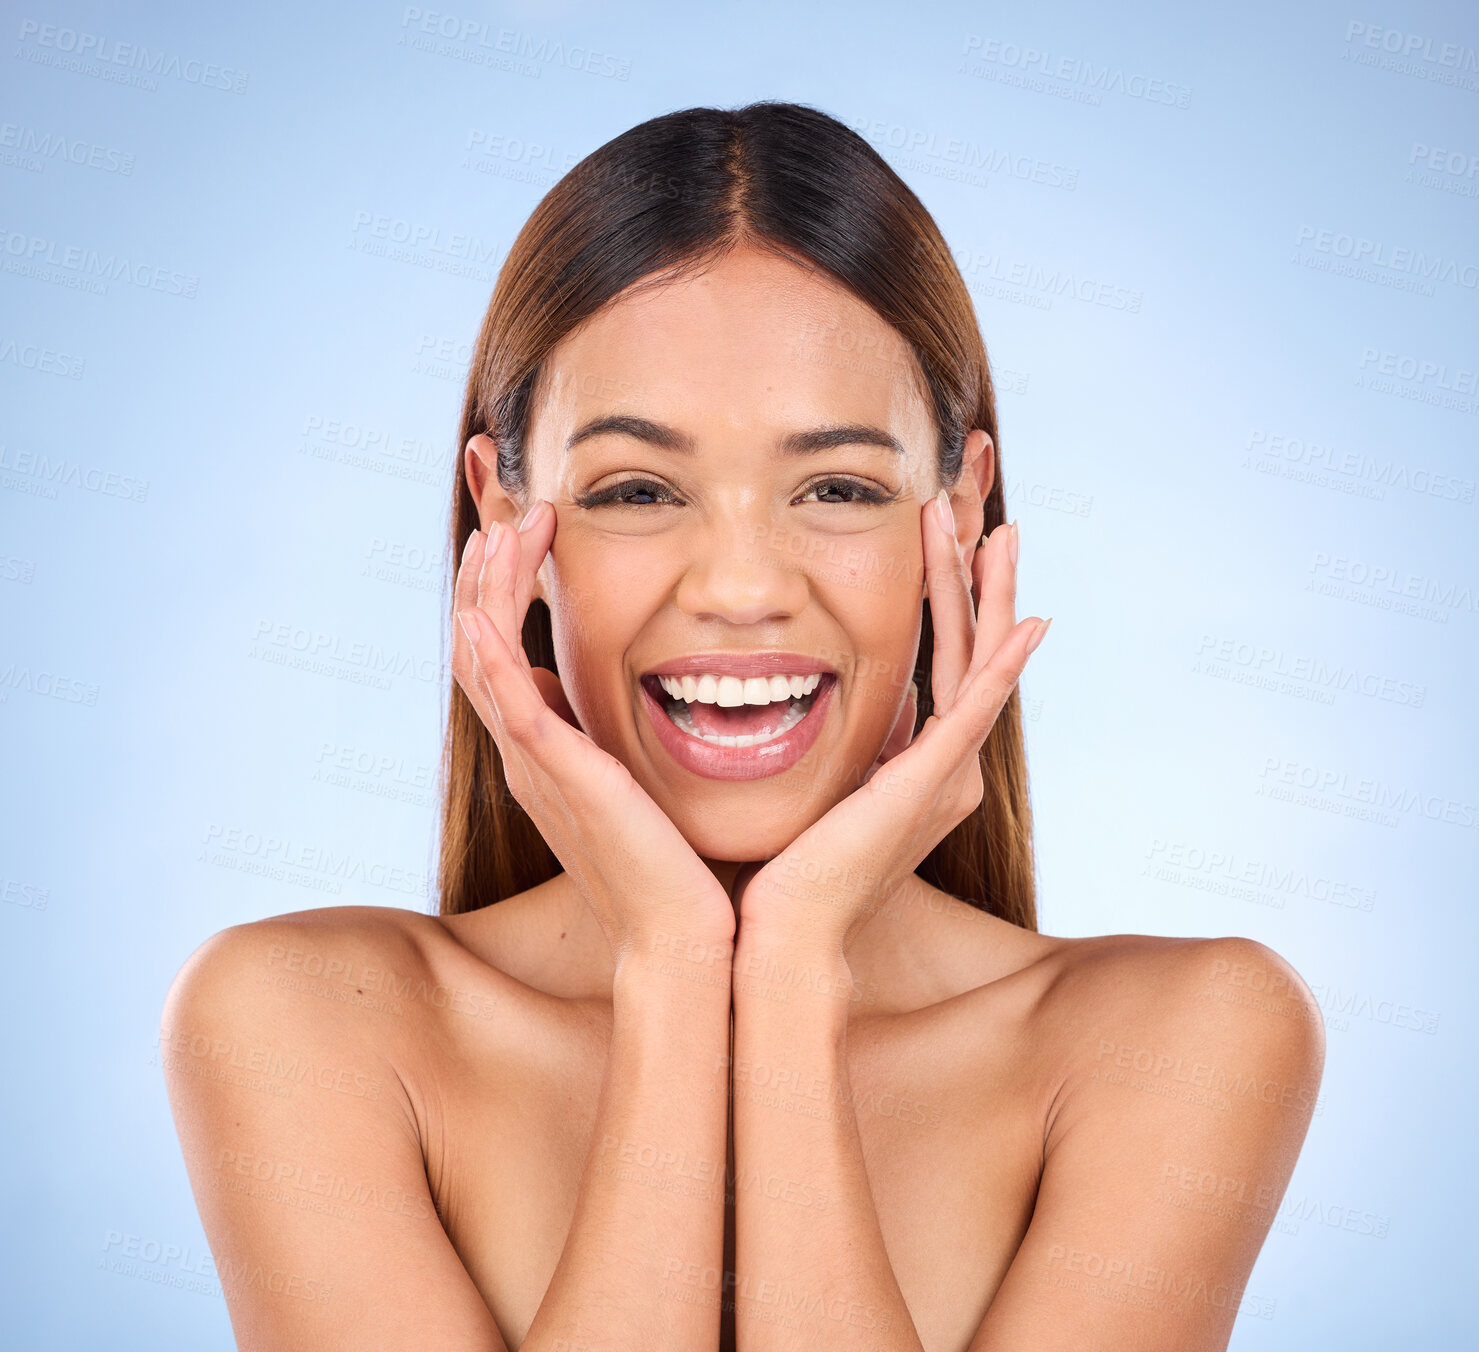 Buy stock photo Skincare, beauty and cosmetics, portrait of happy woman with smile for anti aging or skin glow promo on blue background. Makeup, facial massage and face of model with dermatology promotion in studio.